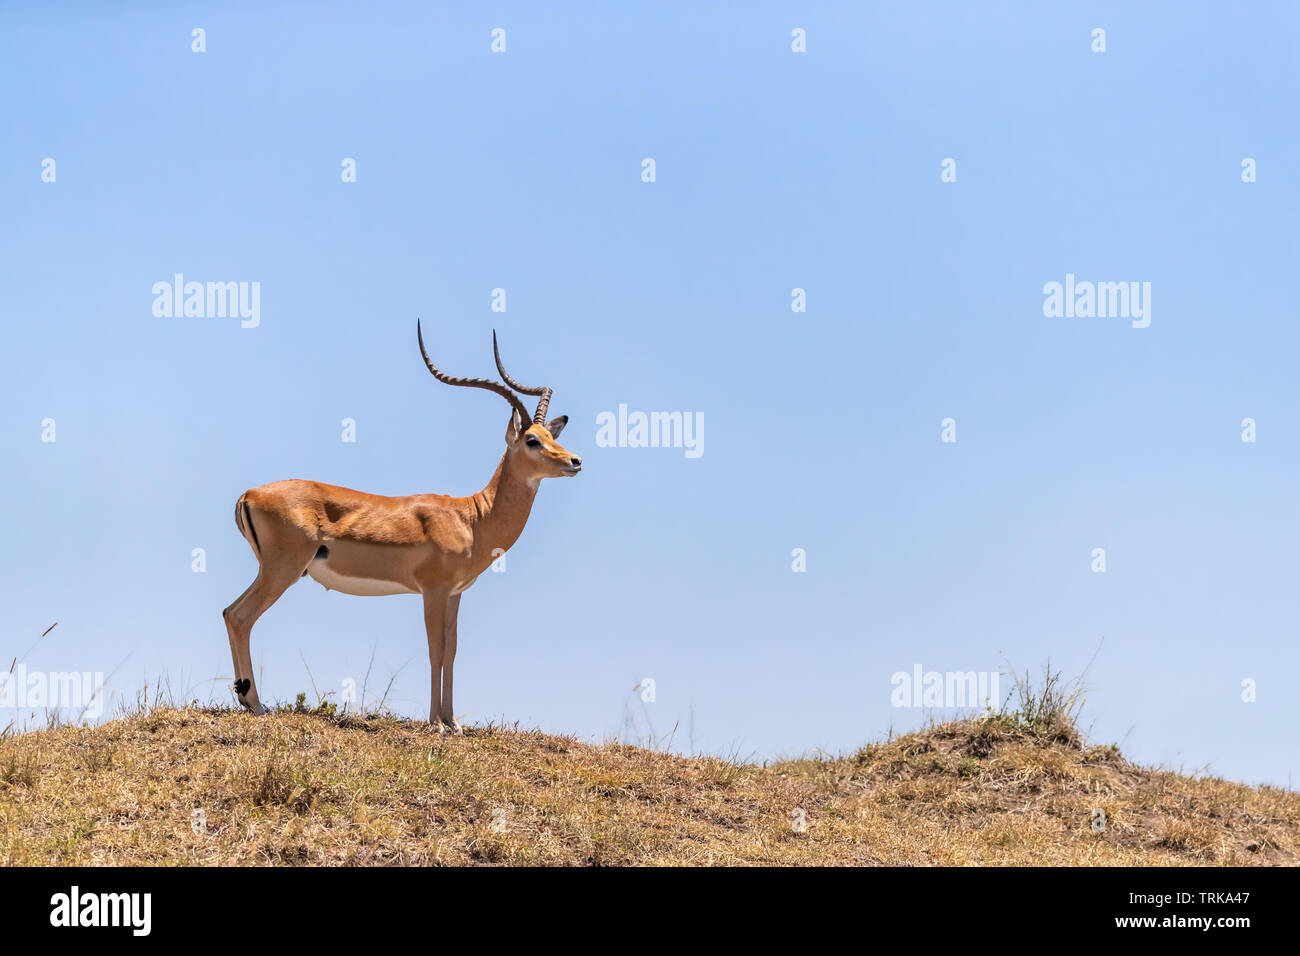 Adult male impala, side profile, stands on the brow of a hill in the Masai Mara, Kenya. Stock Photo